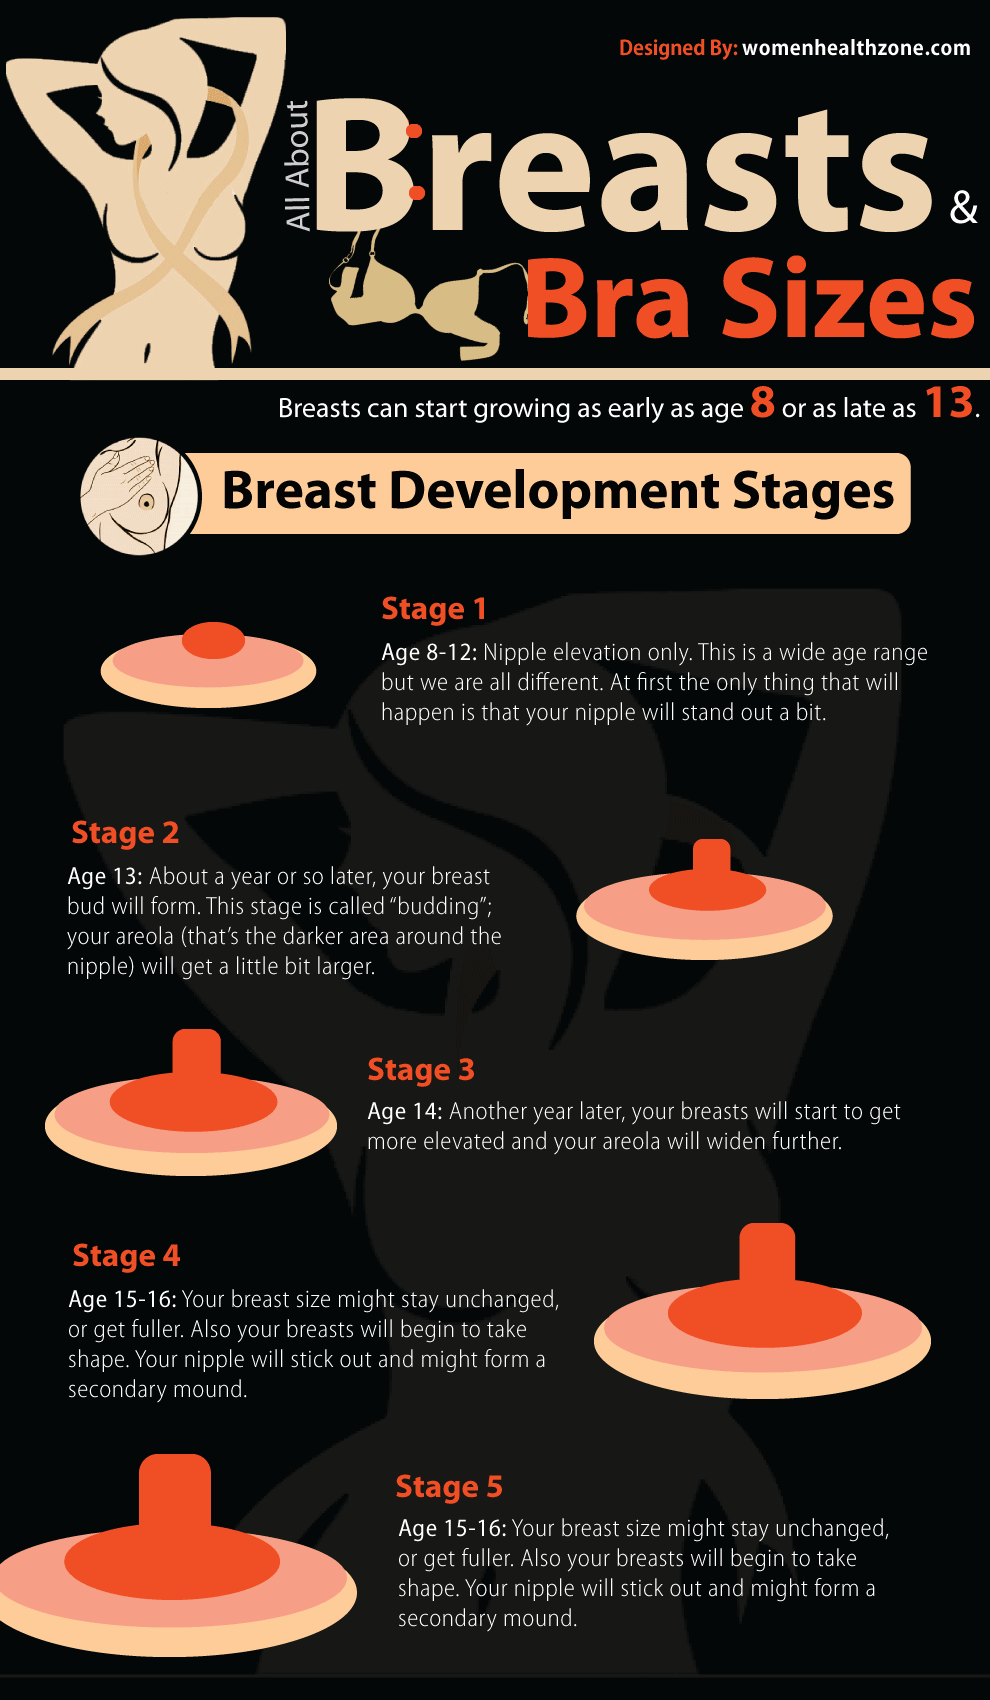 All About Breasts and Bra Sizes Infographic